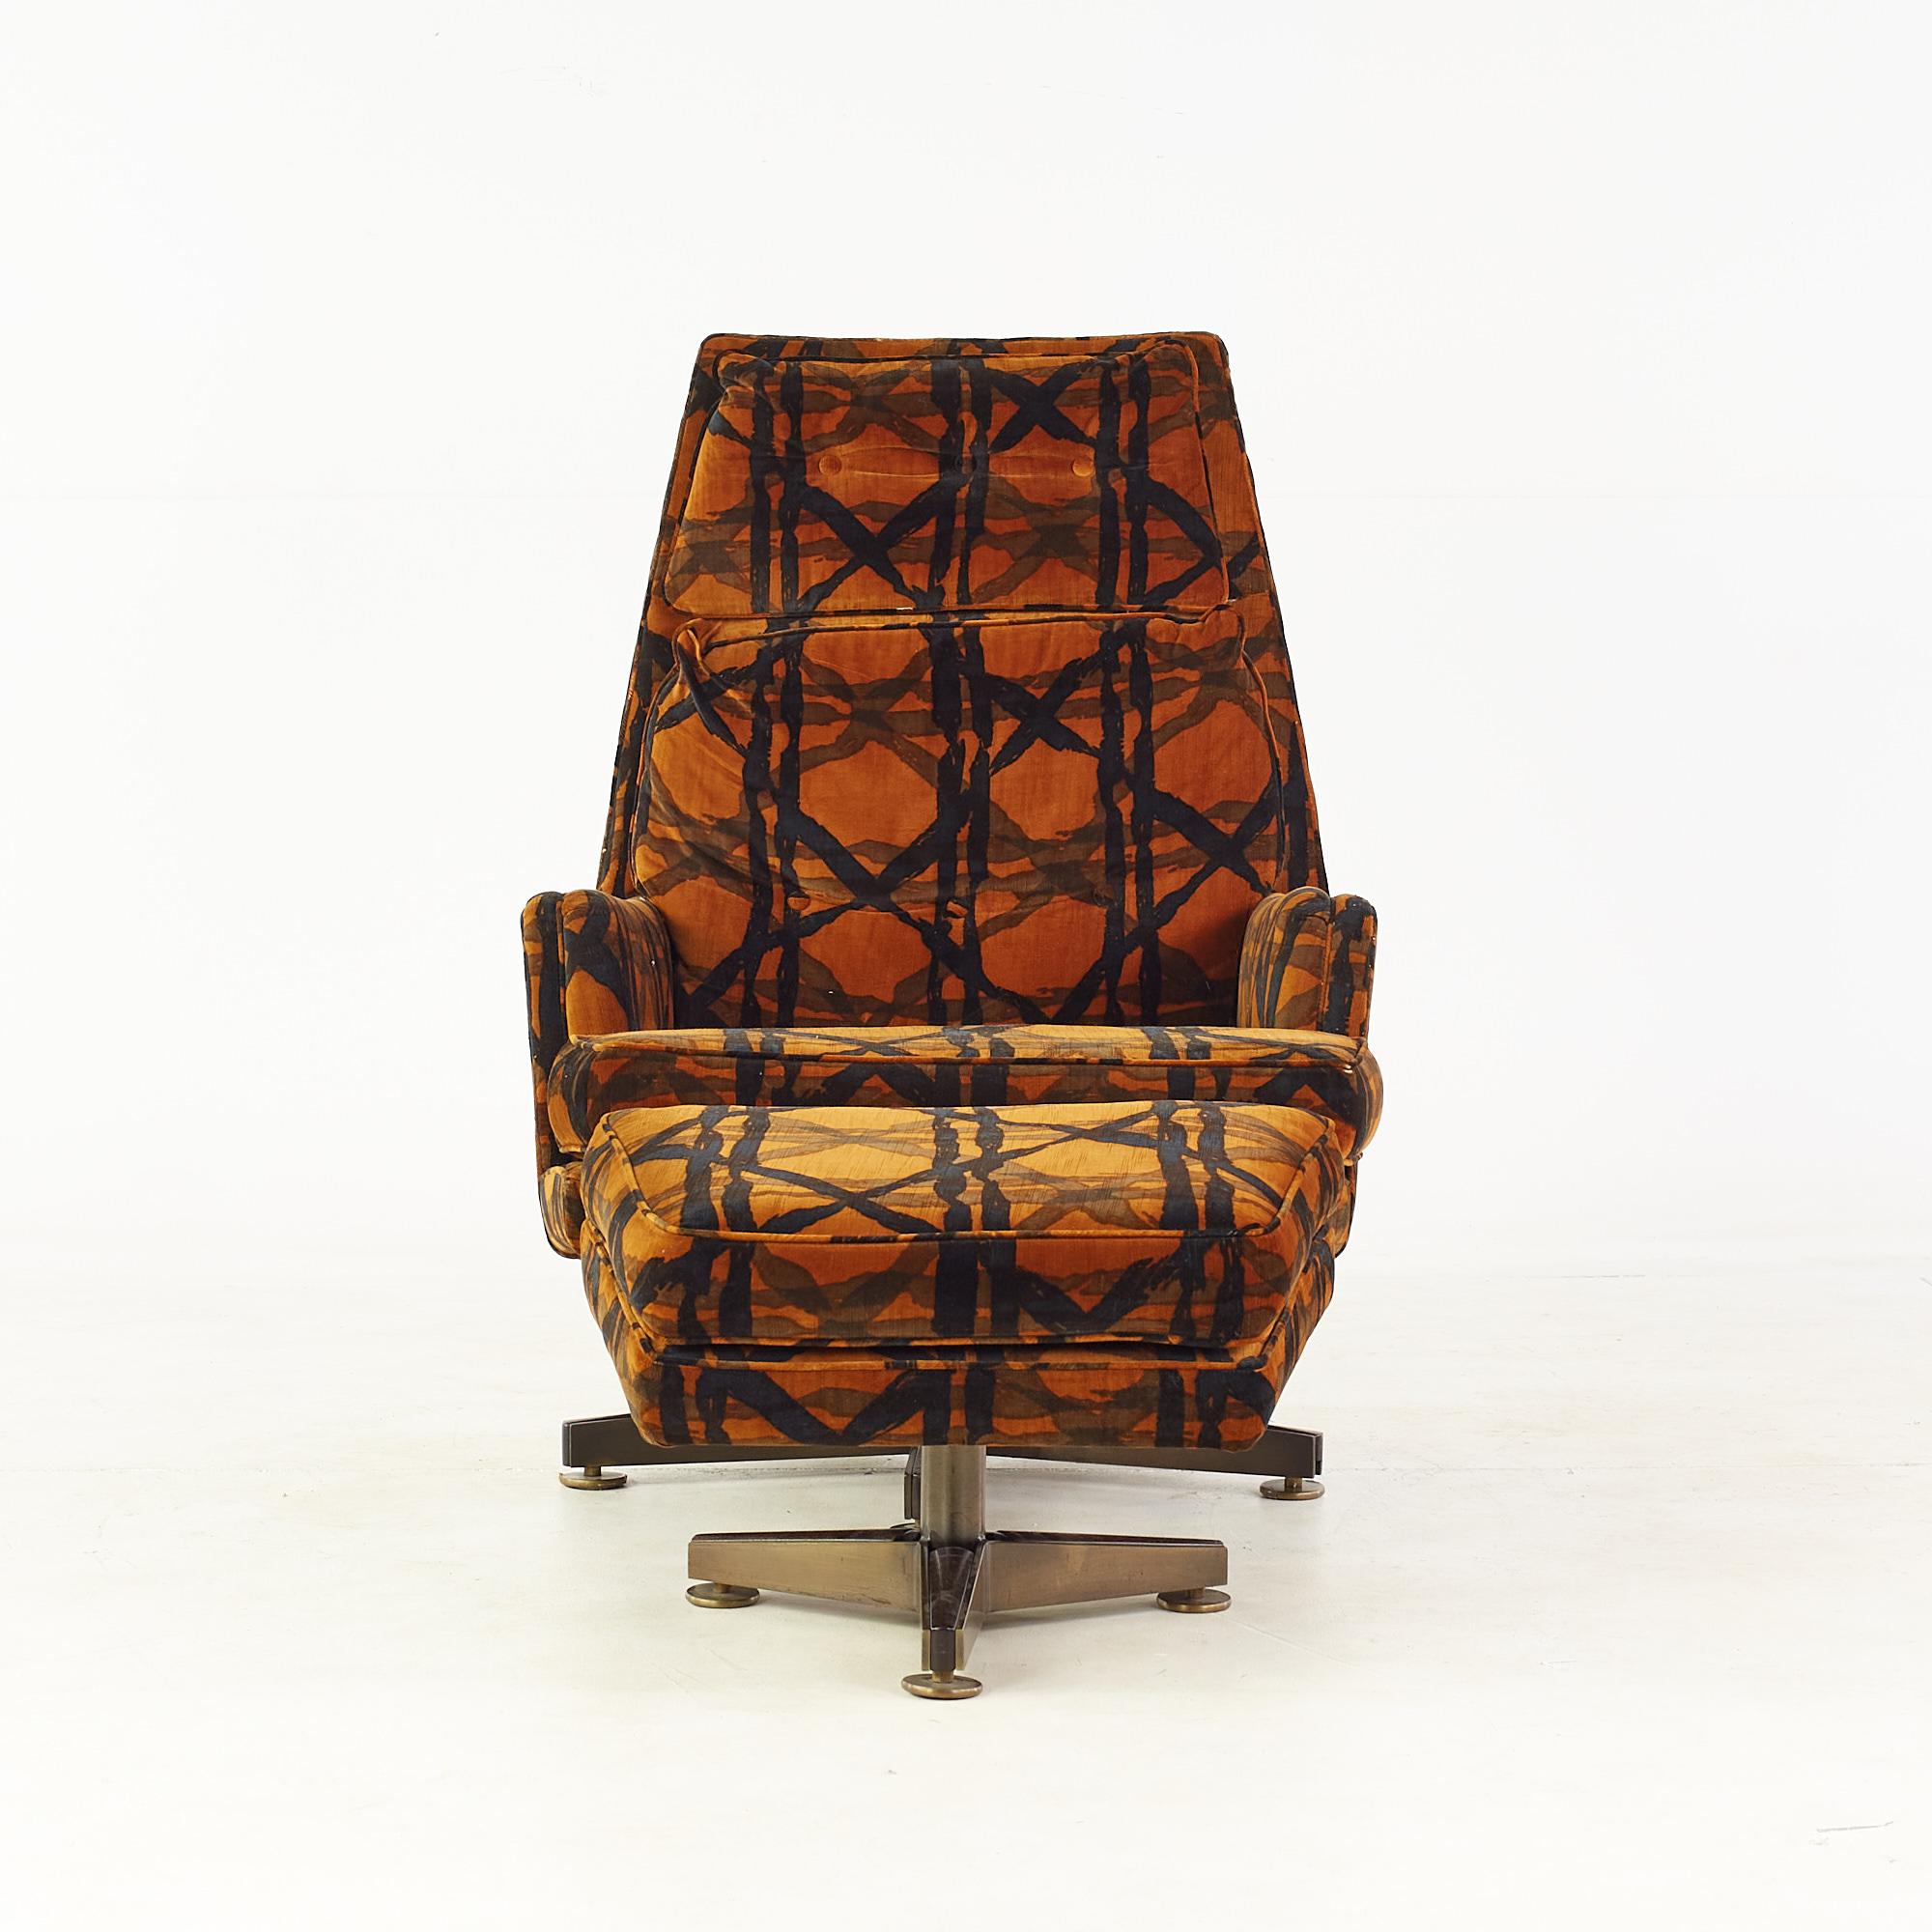 Edward Wormley for Dunbar Mid Century Lounge chair and ottoman with Jack Lenor Larsen Fabric

The chair measures: 32 wide x 48 deep x 42.5 high, with a seat height of 17 inches
The ottoman measures: 24 wide x 18 deep x 16 inches high

All